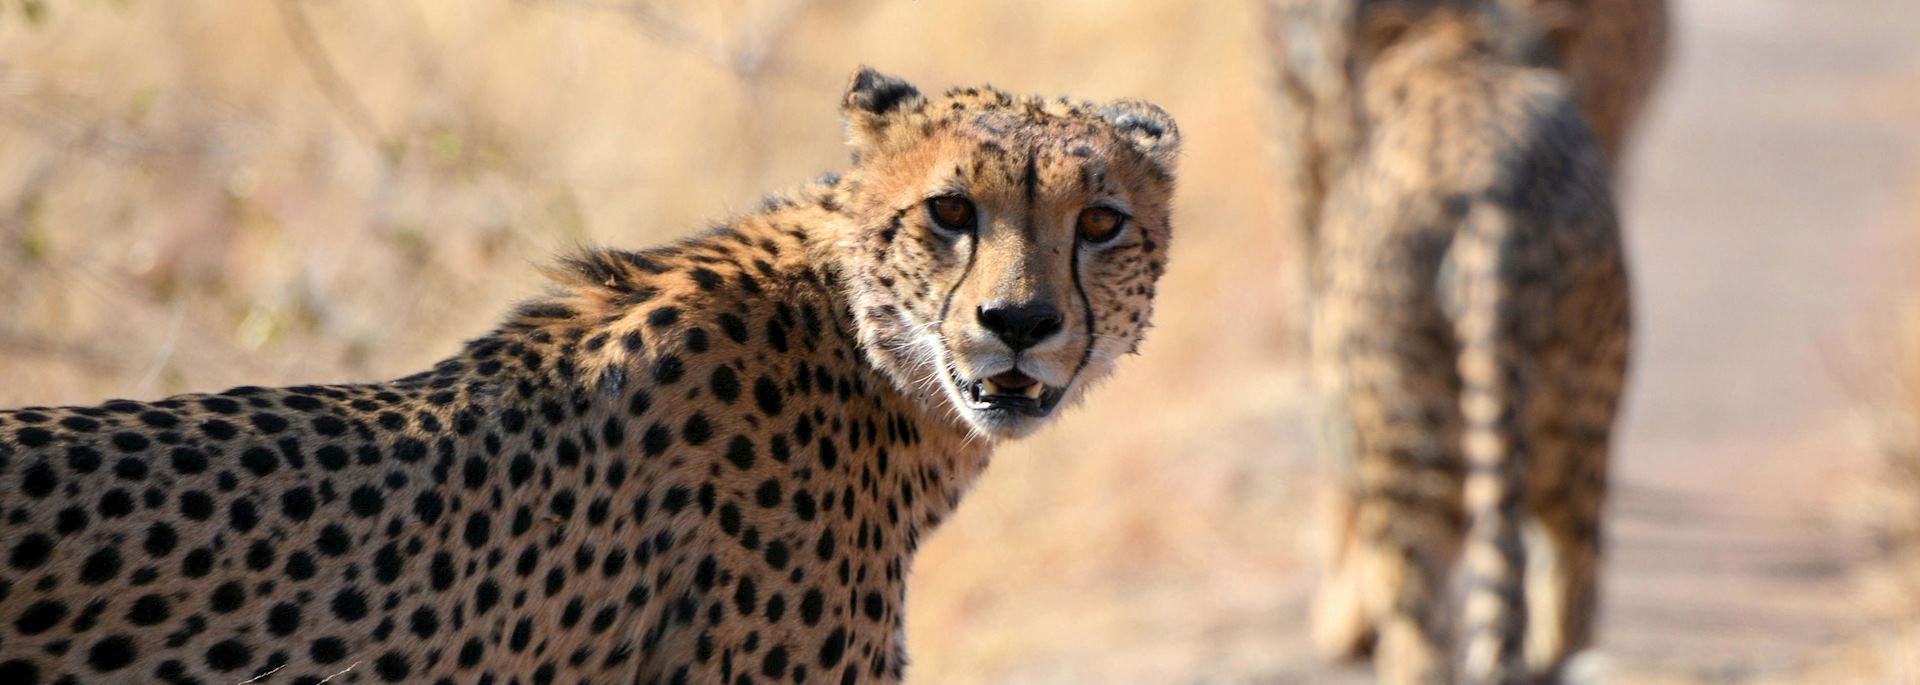 Cheetah in South Africa